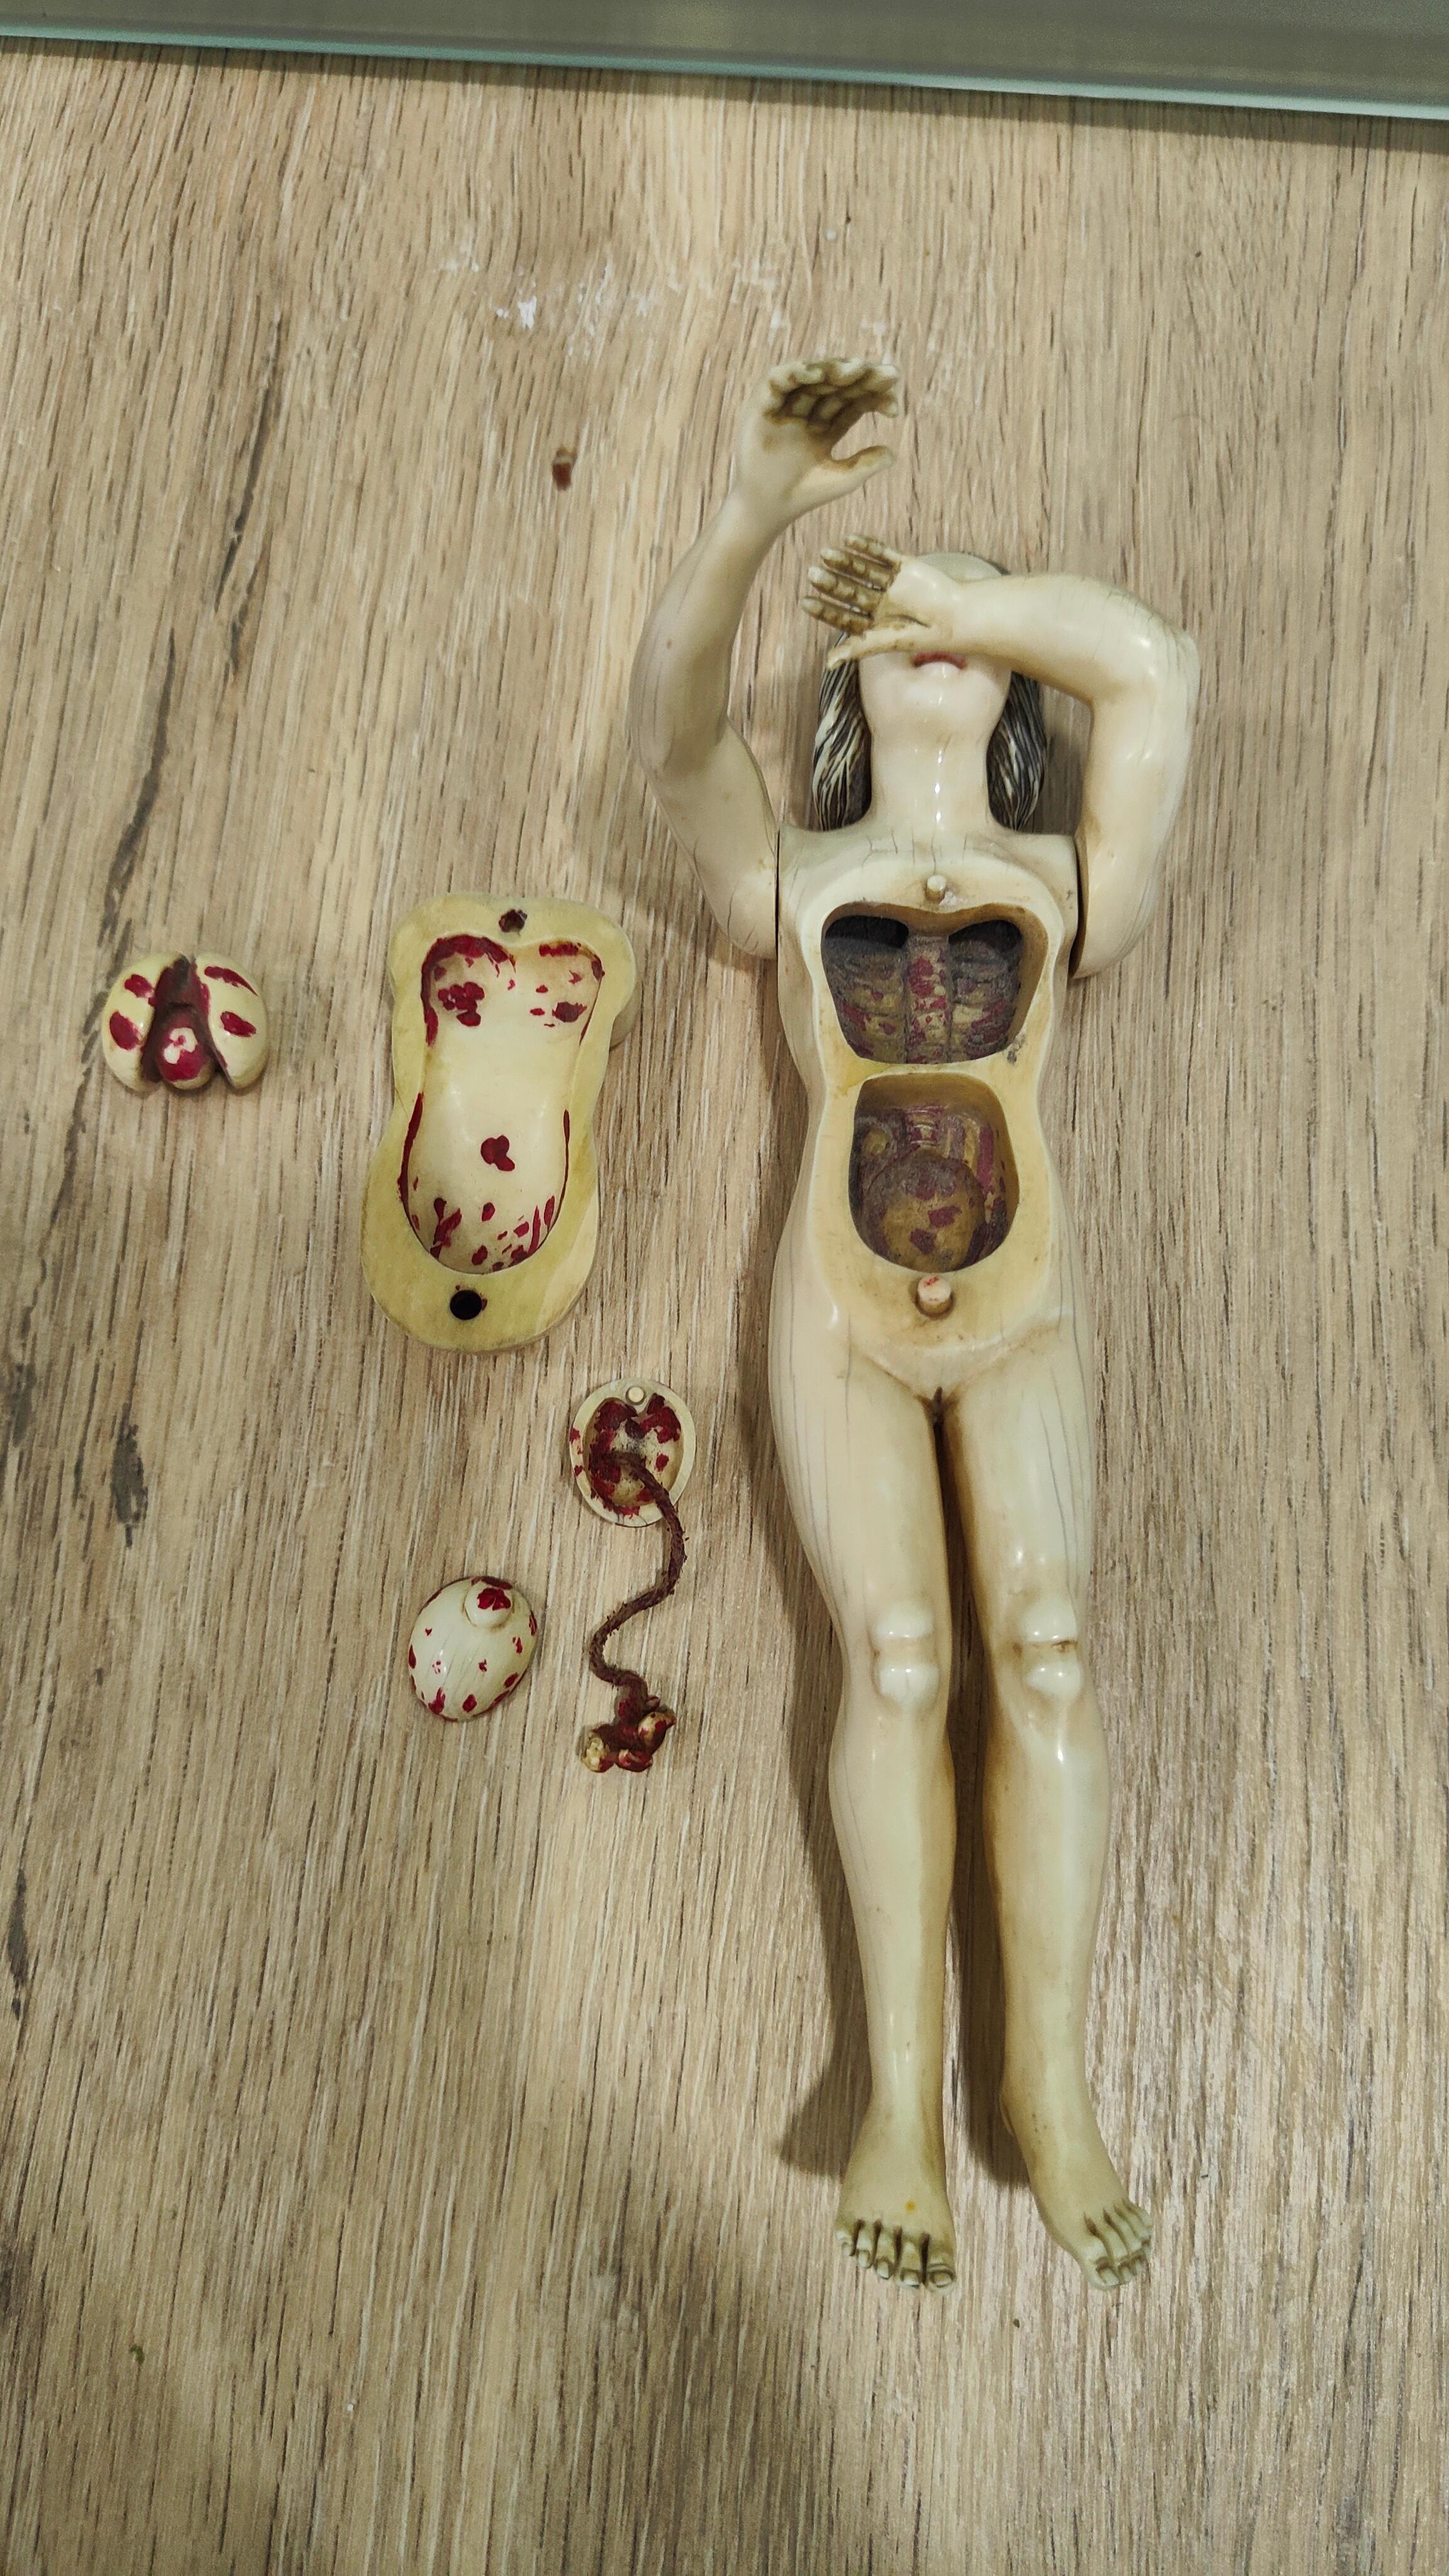 A GERMAN  ANATOMICAL MODEL OF a PREGNANT WOMAN STEPHEN ZICK For Sale 12